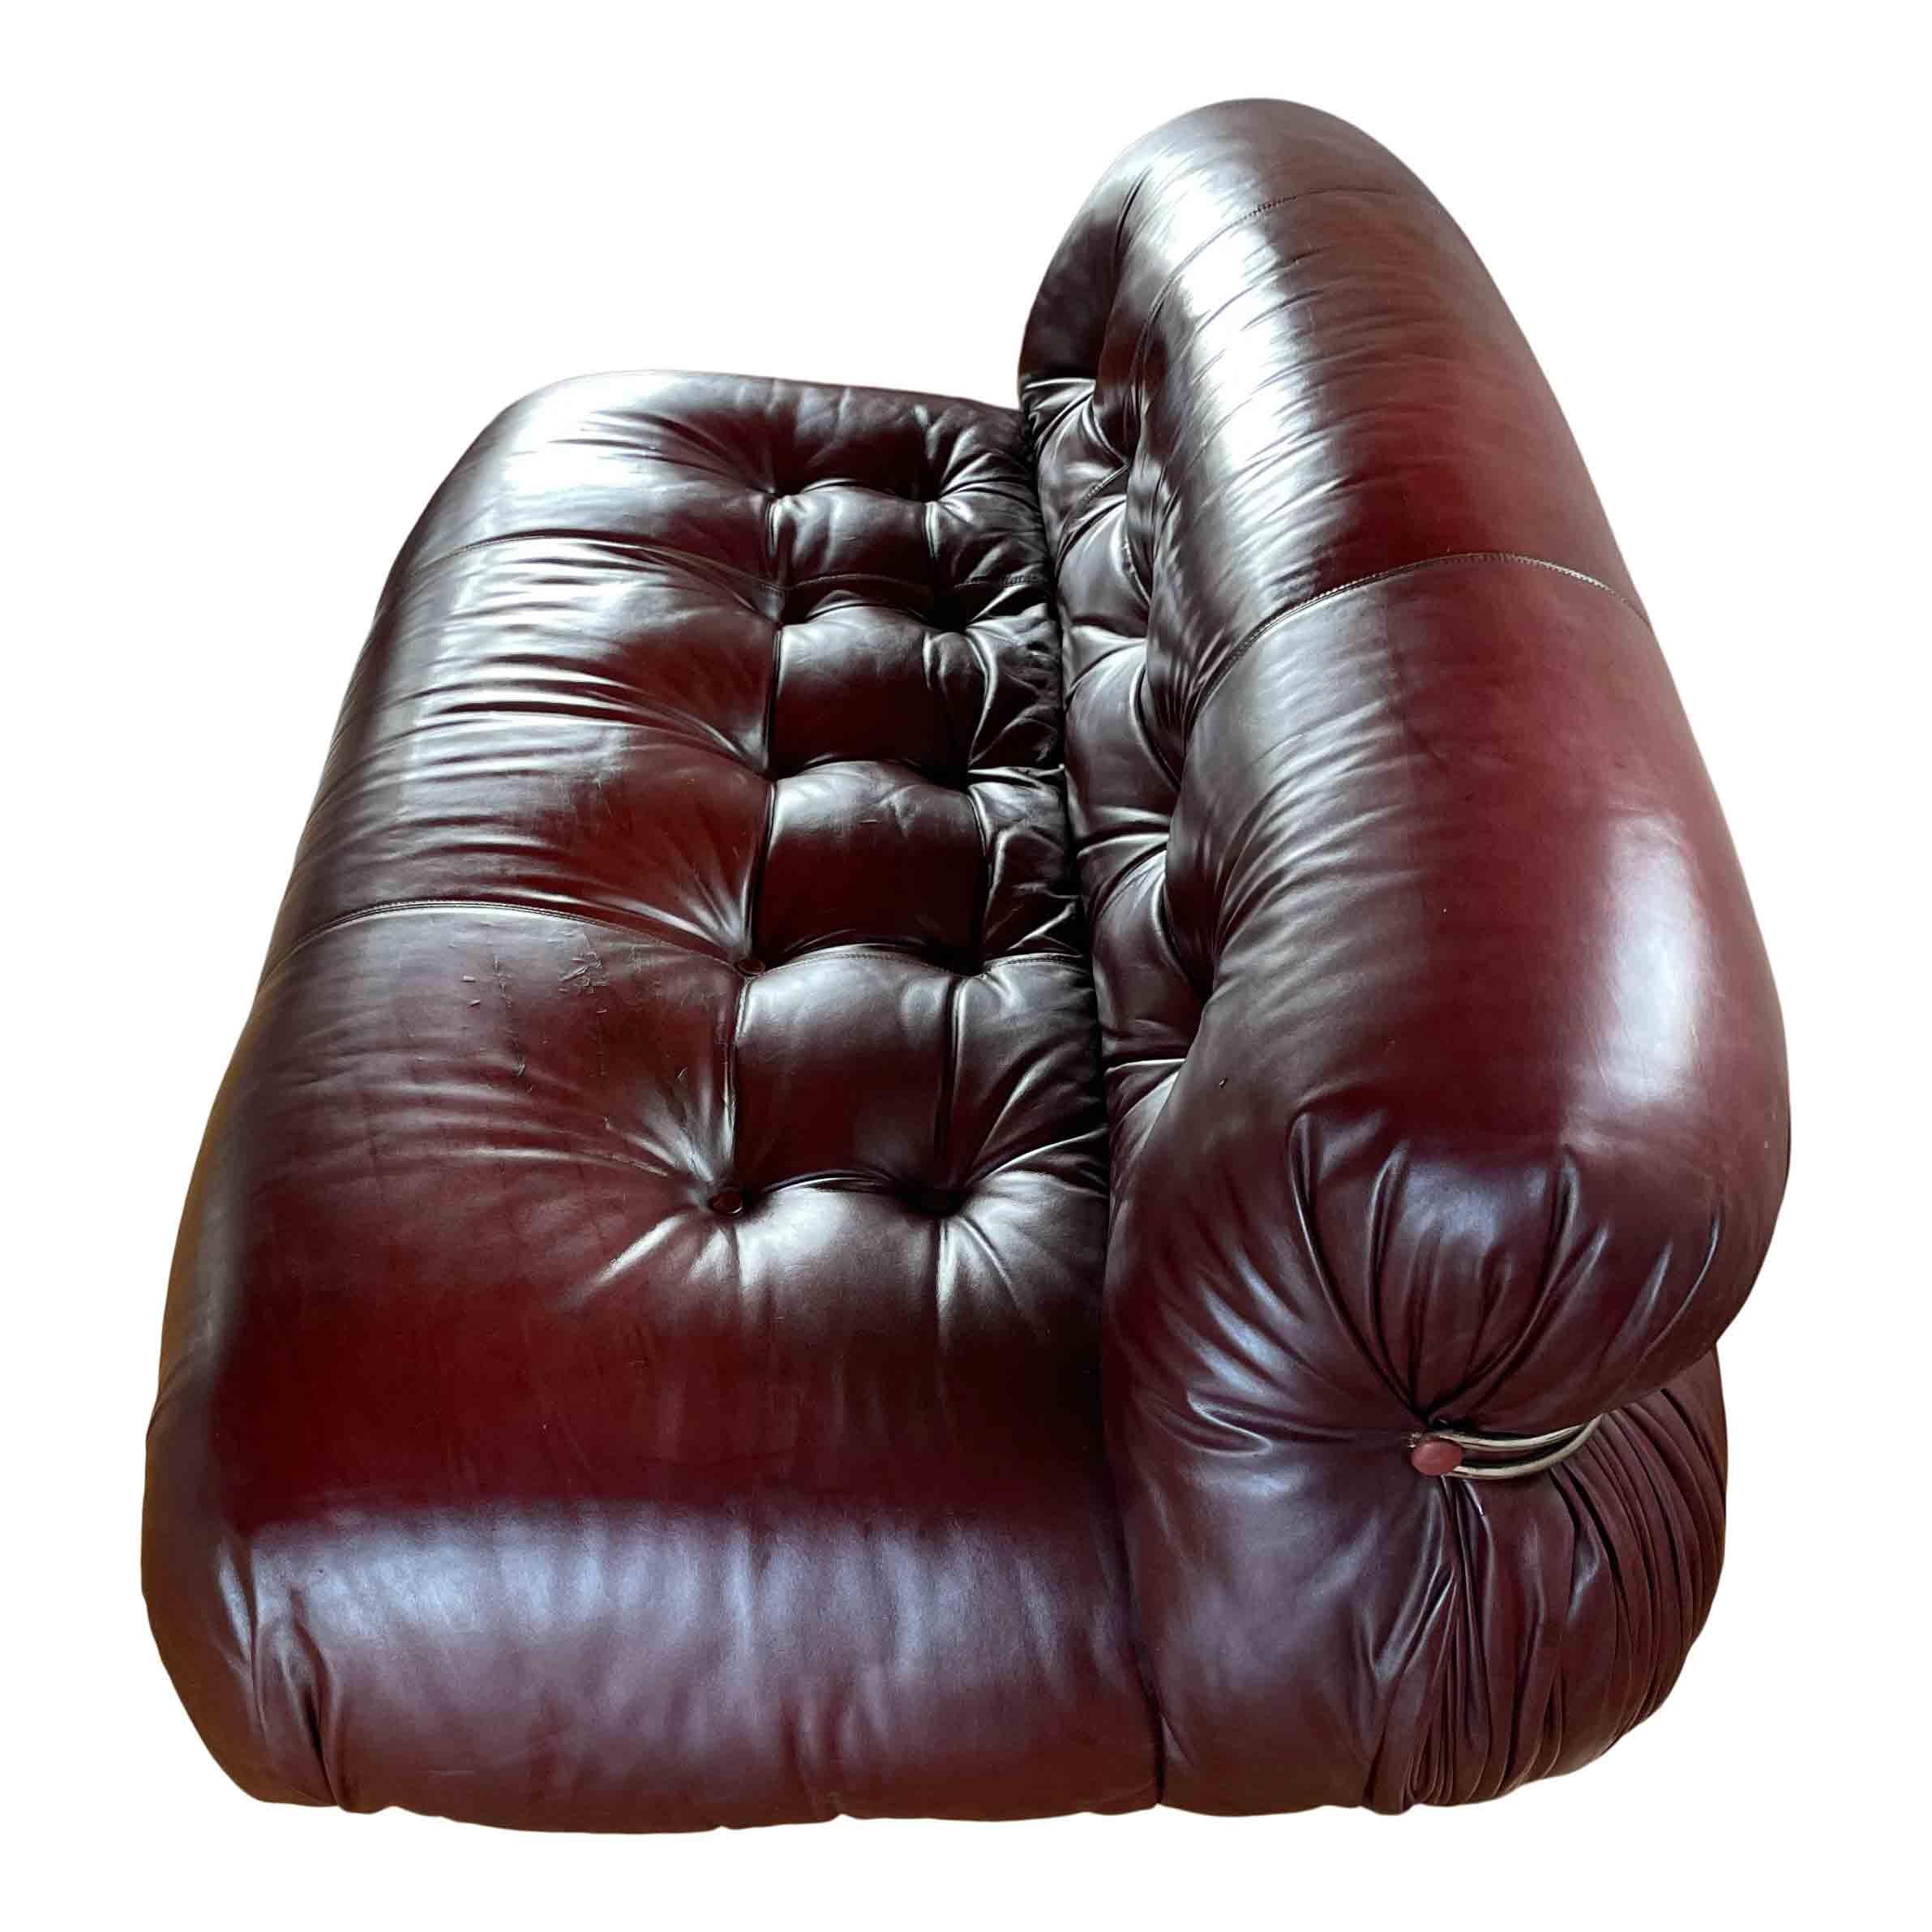 Space Age Afra and Tobia Scarpa Brown Leather Two-Seater Soriana Sofa for Cassina, 1969 For Sale